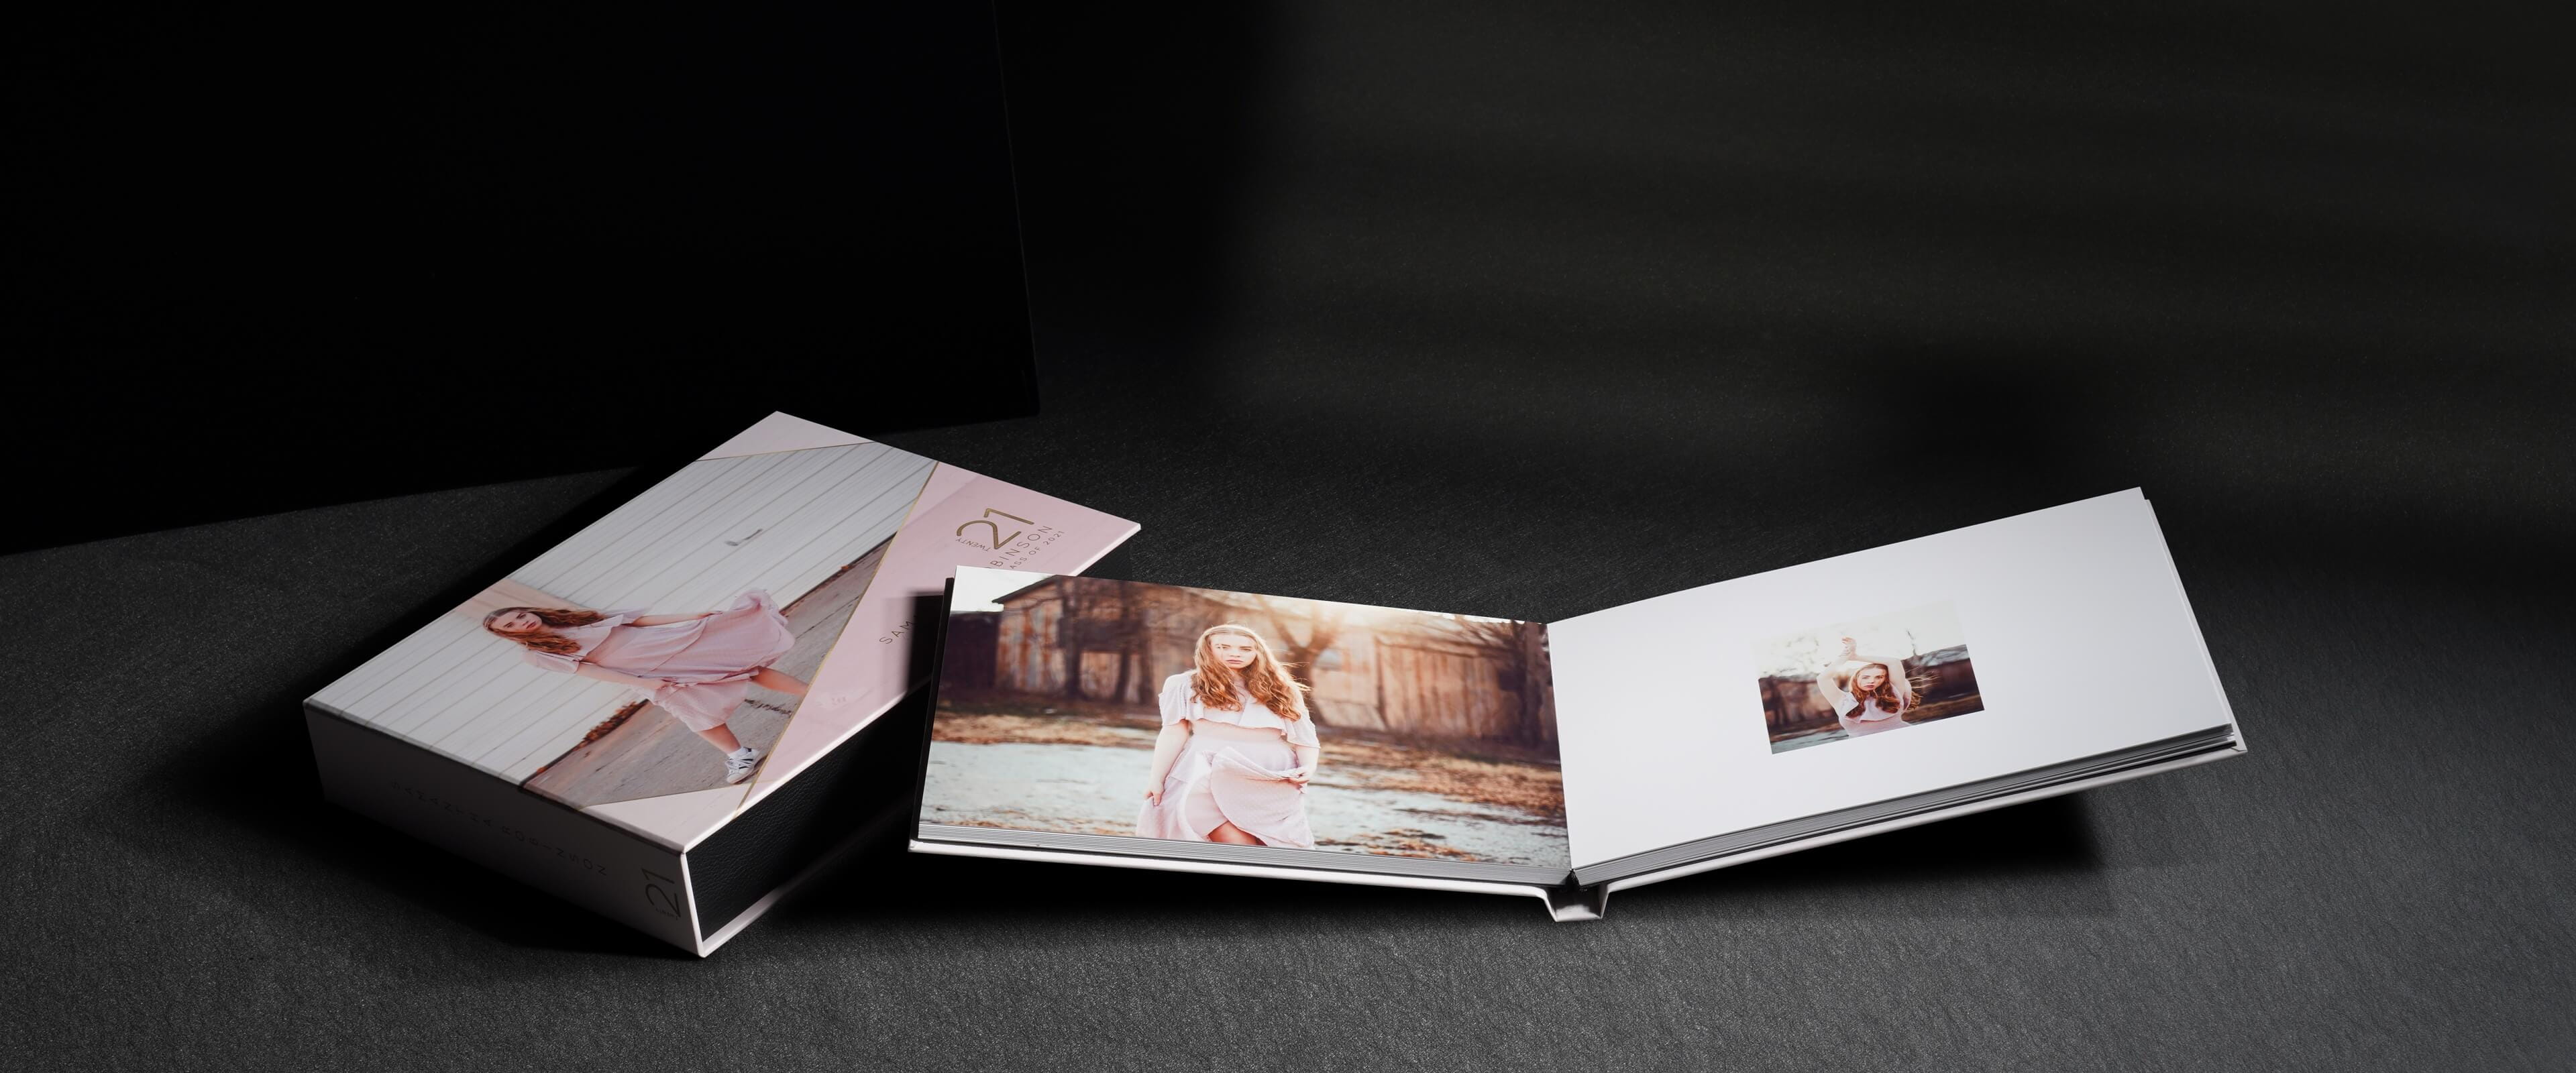 an image box album set showing a photo album opened resting on a printed box